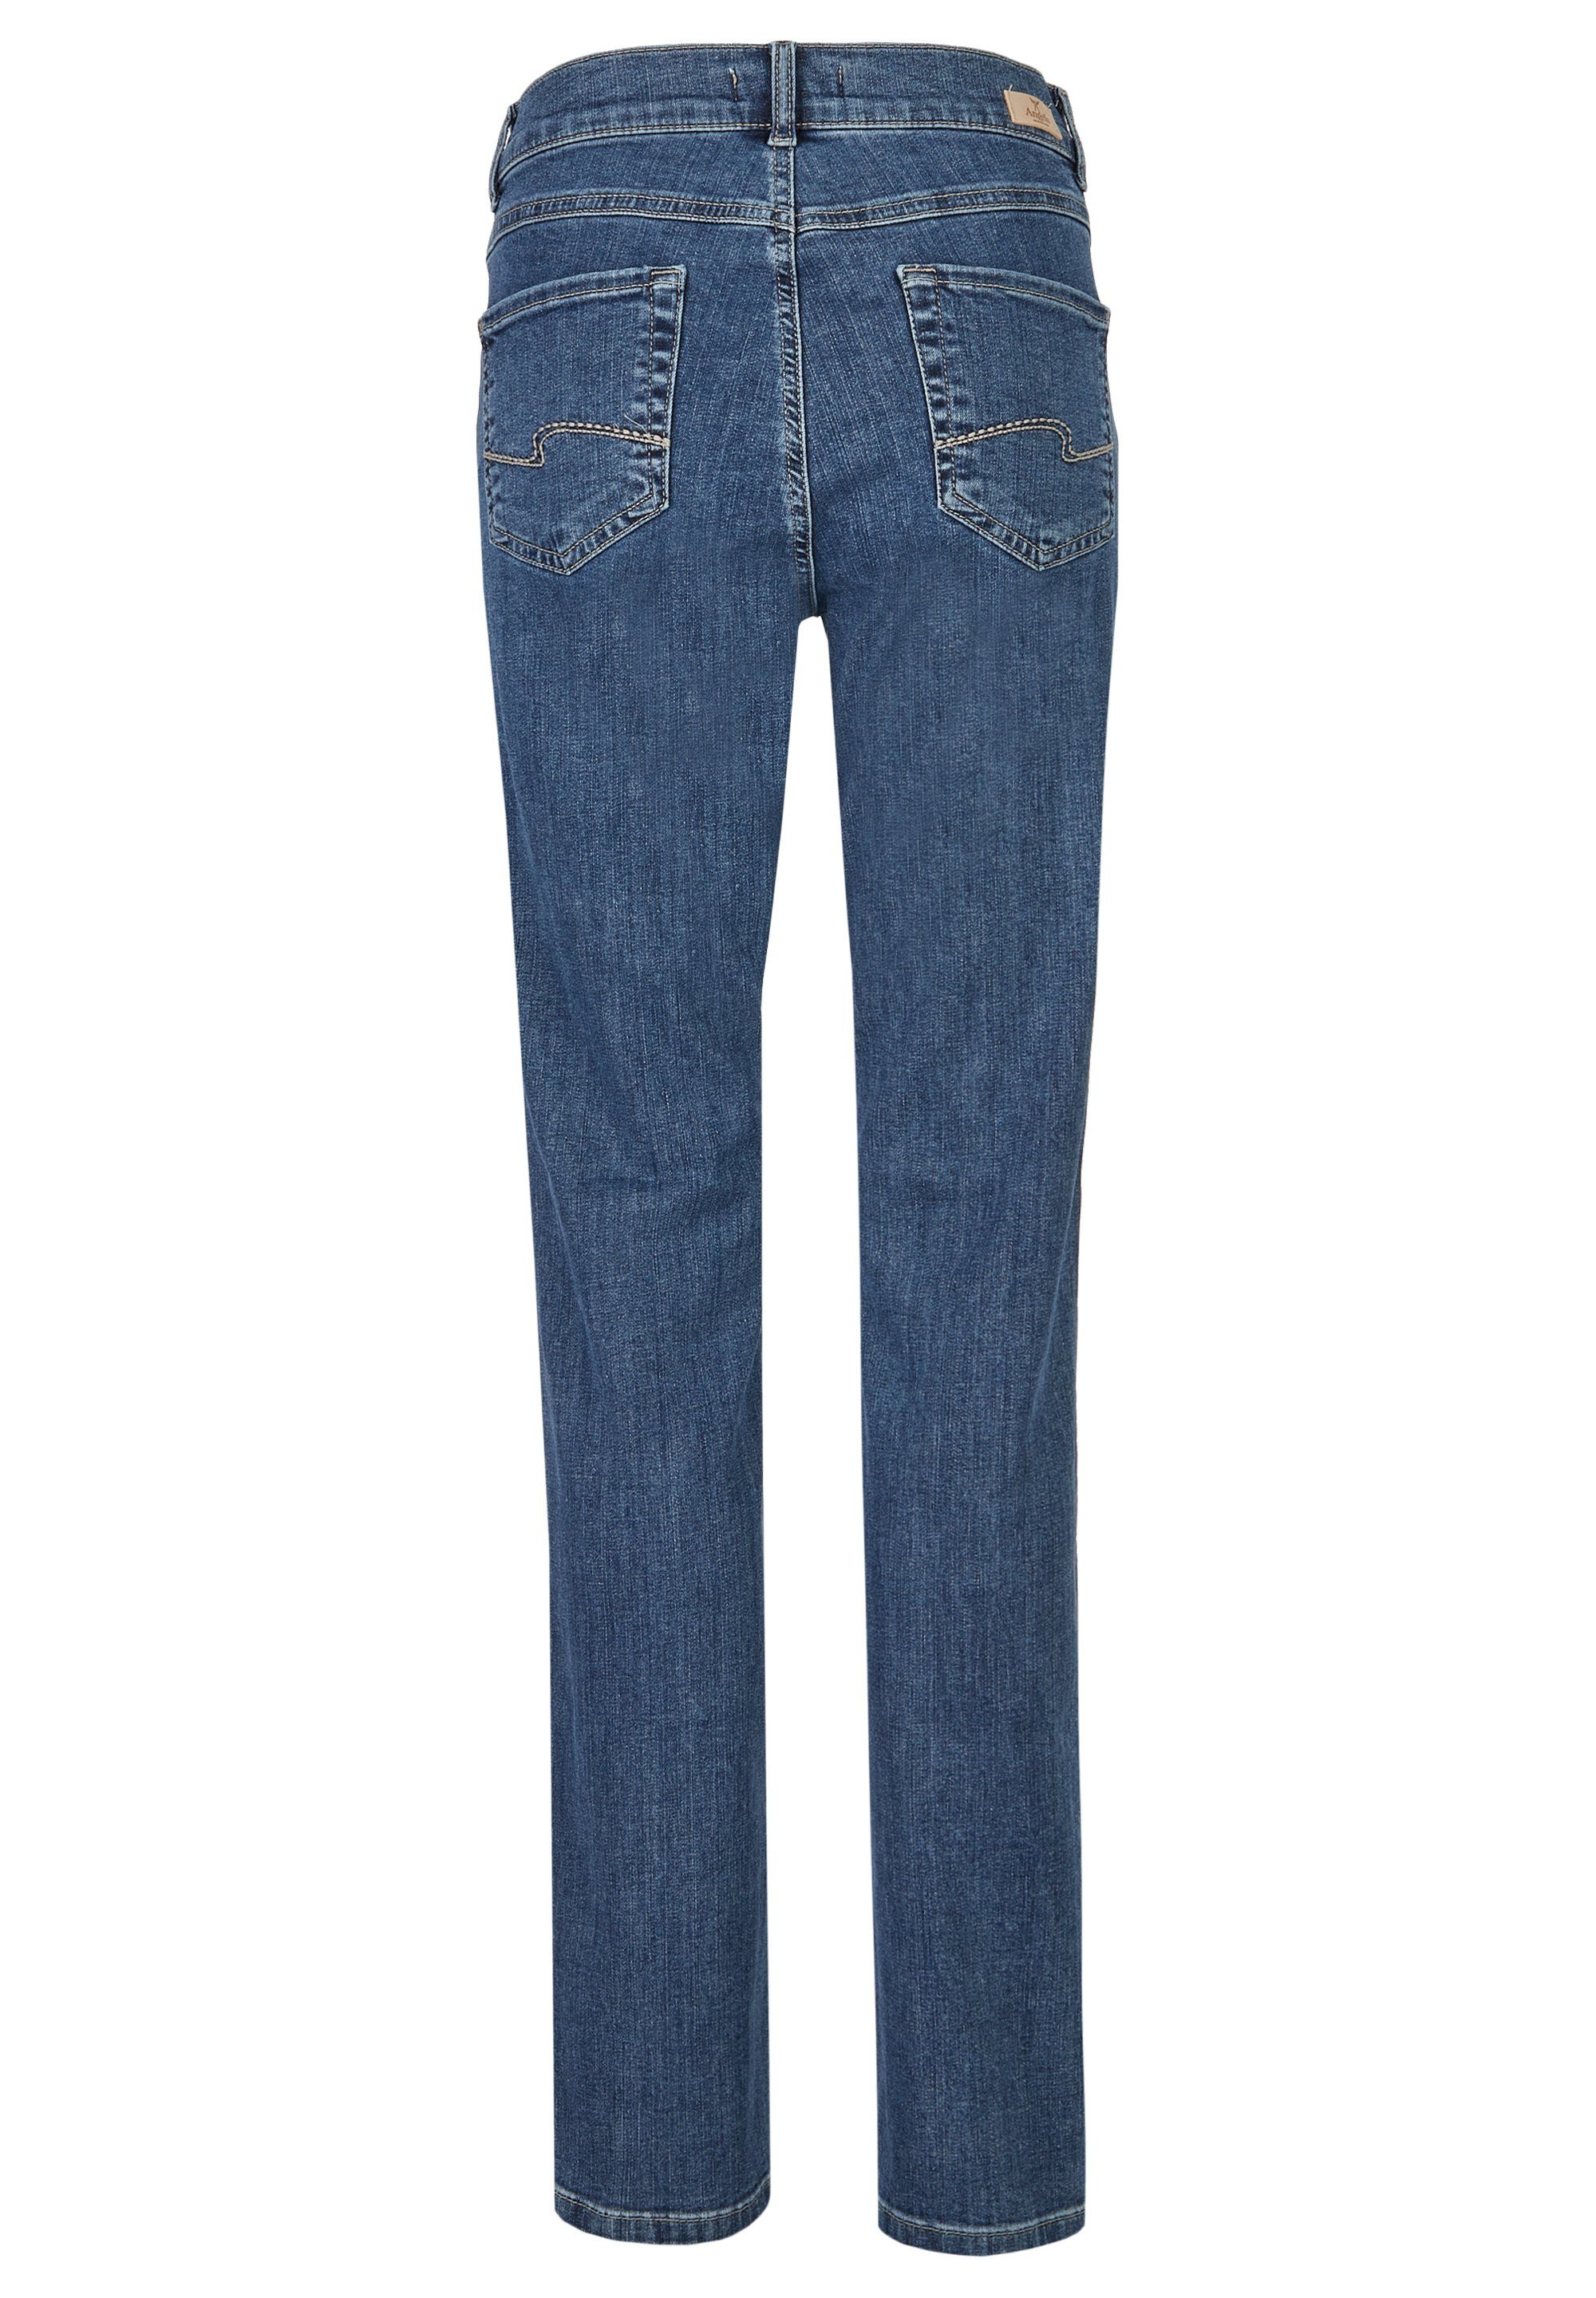 JEANS STRETCH 3400.33 mid - blue ANGELS CICI ANGELS Stretch-Jeans 346